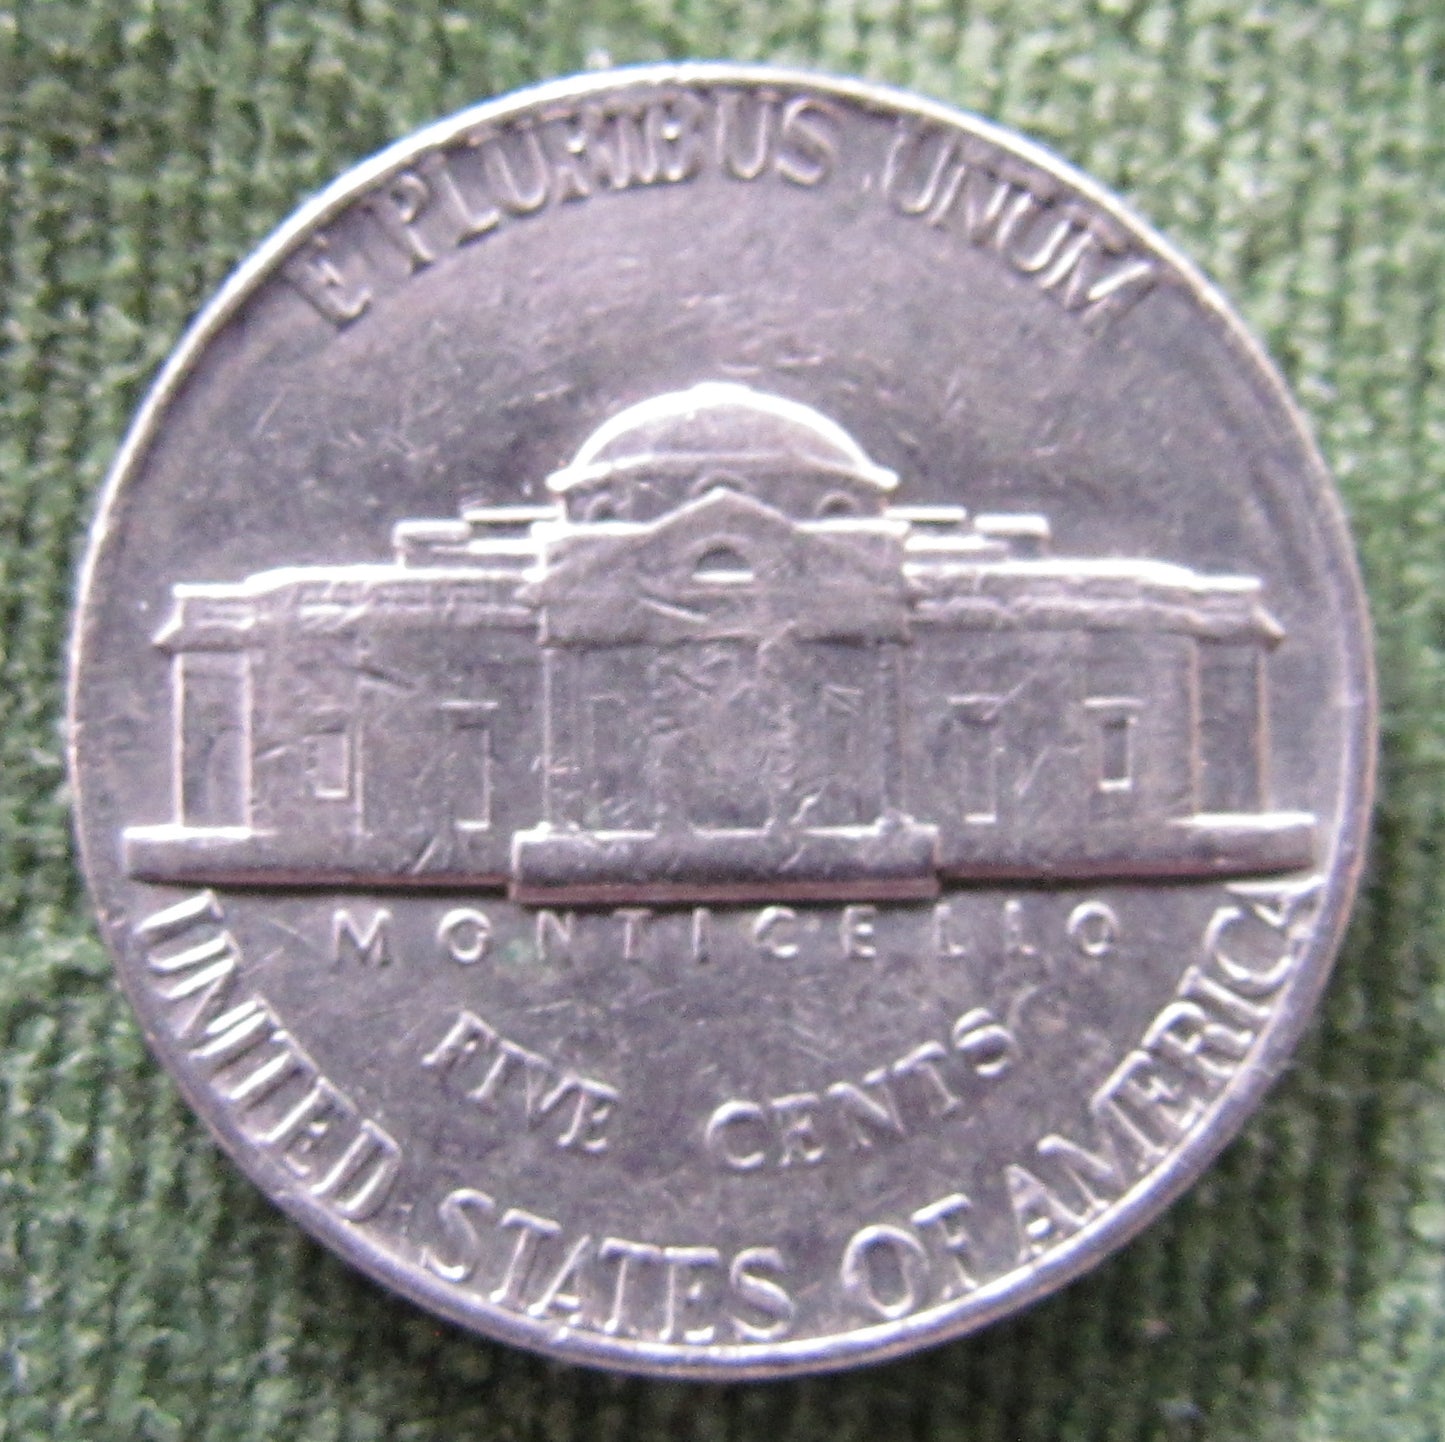 USA American 1974 D Nickel Jefferson Coin - Circulated